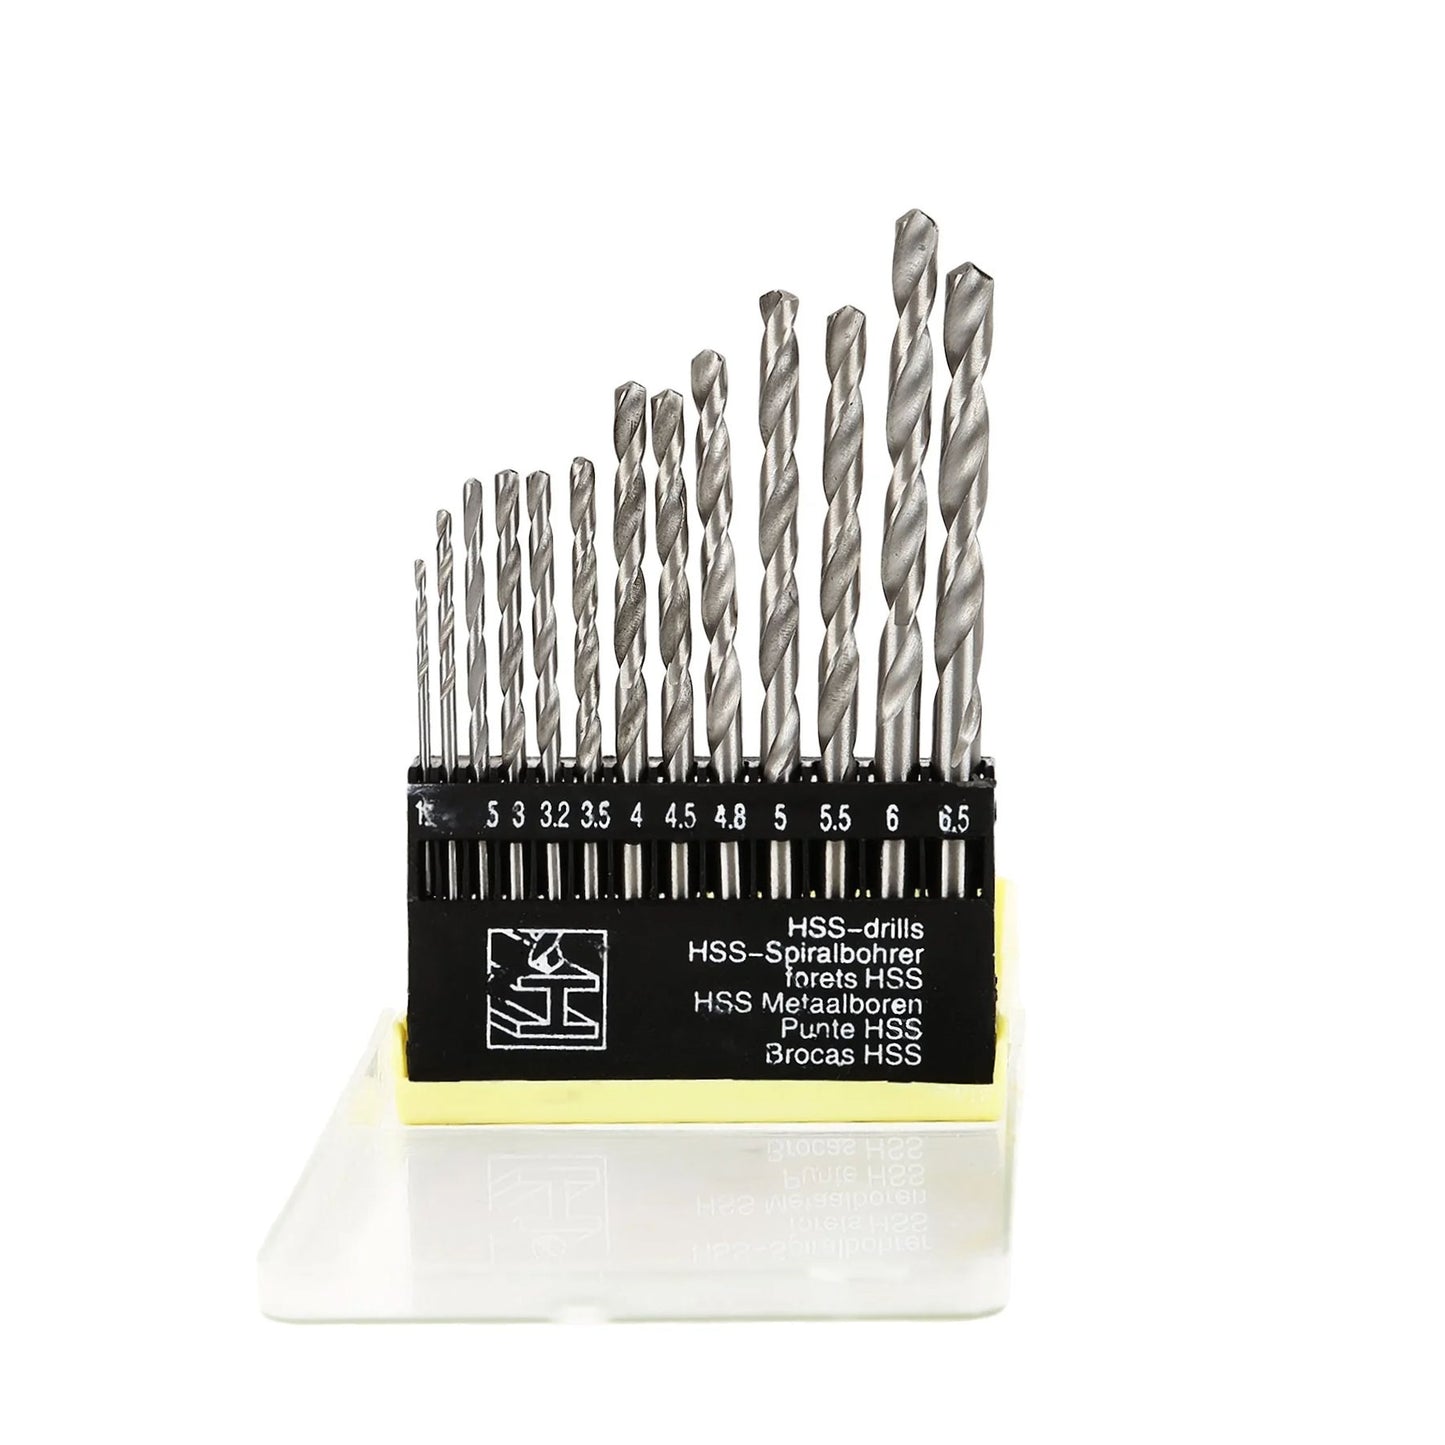 Drill Bit Set of 13 Pieces for Wood, Plastic And Metal